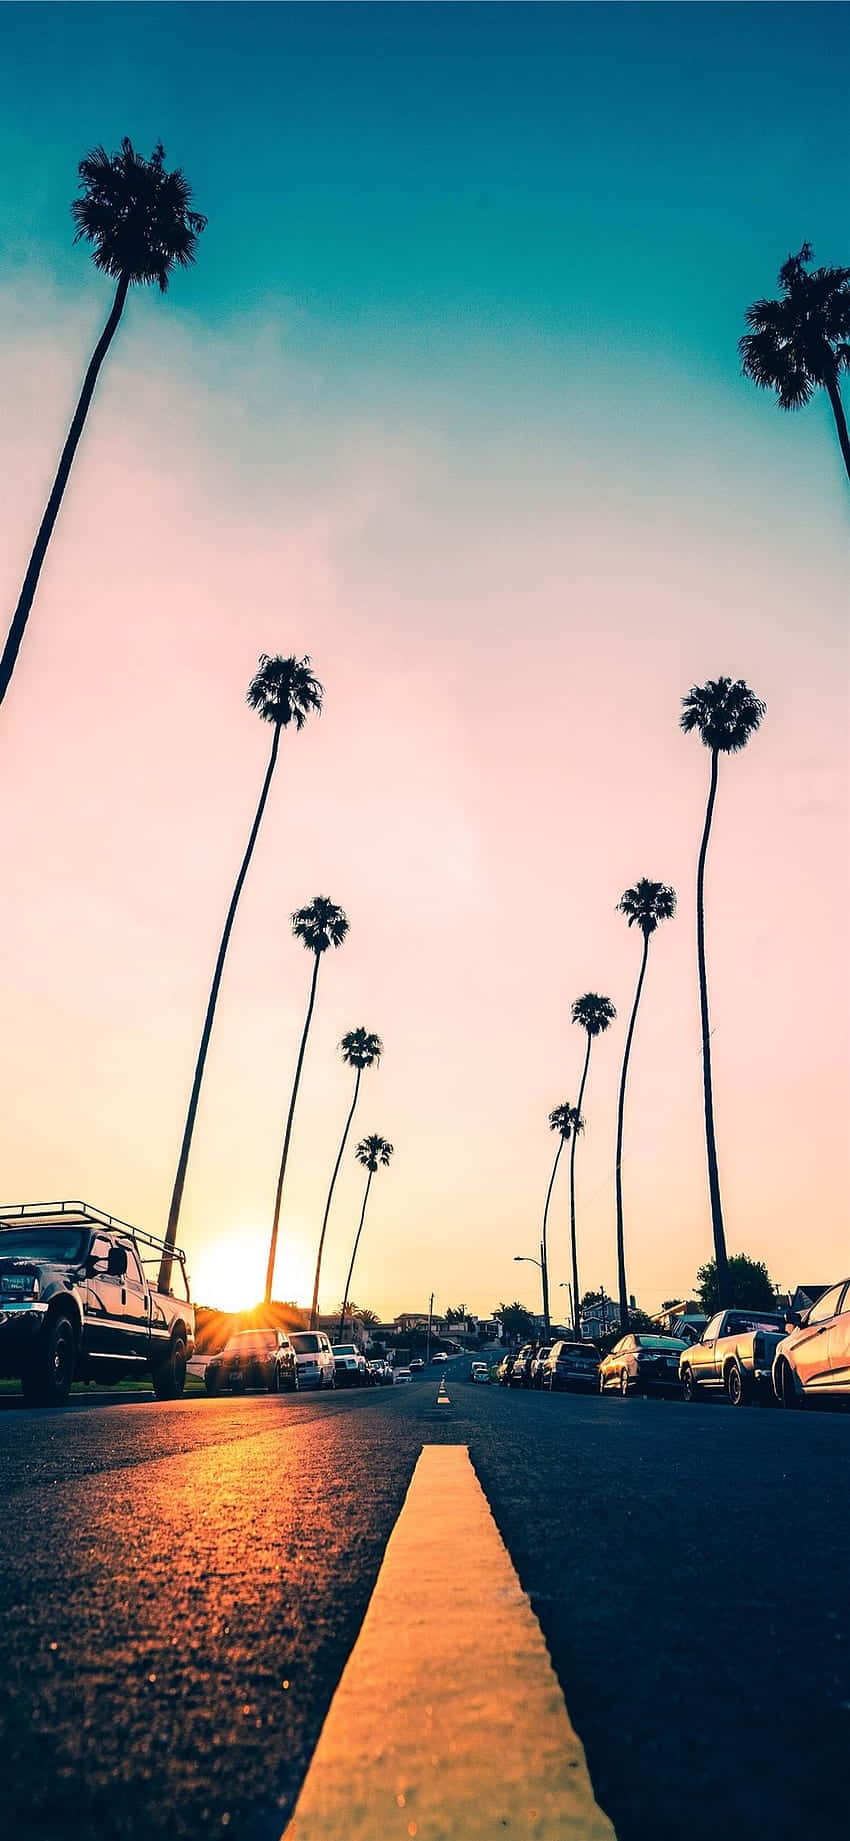 Palm Trees In The Road At Sunset Wallpaper